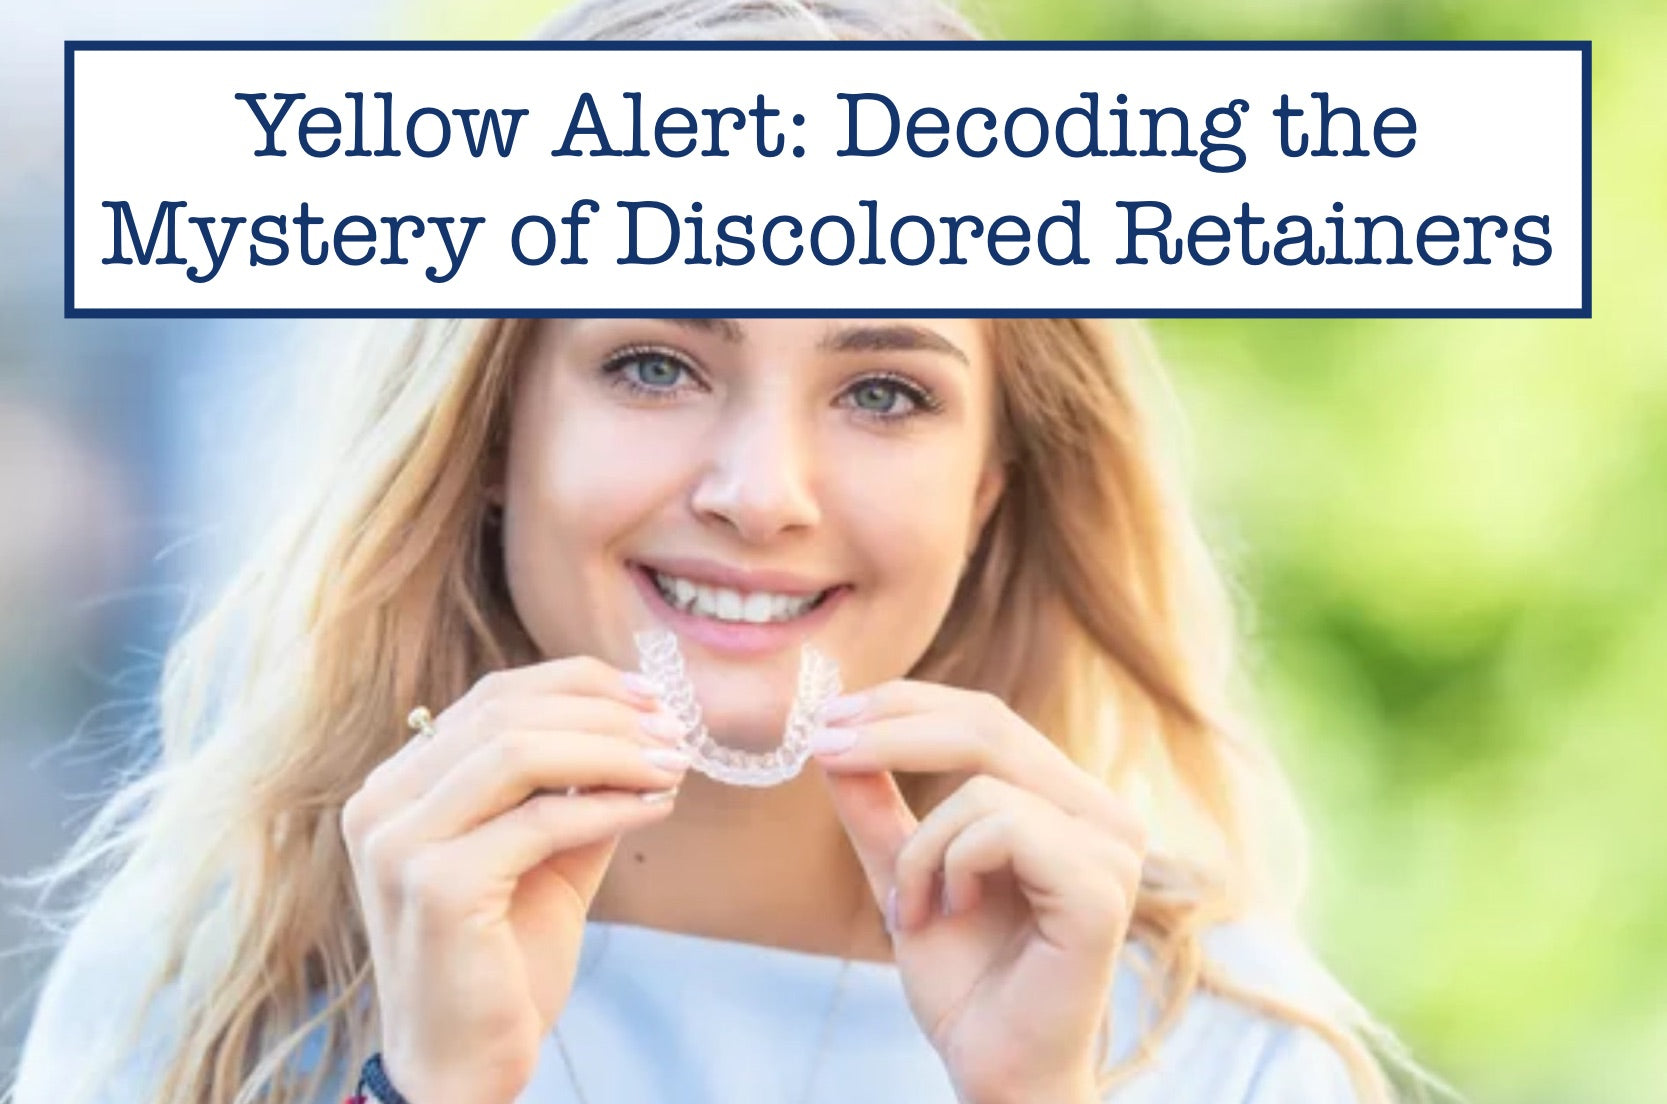 Yellow Alert: Decoding the Mystery of Discolored Retainers